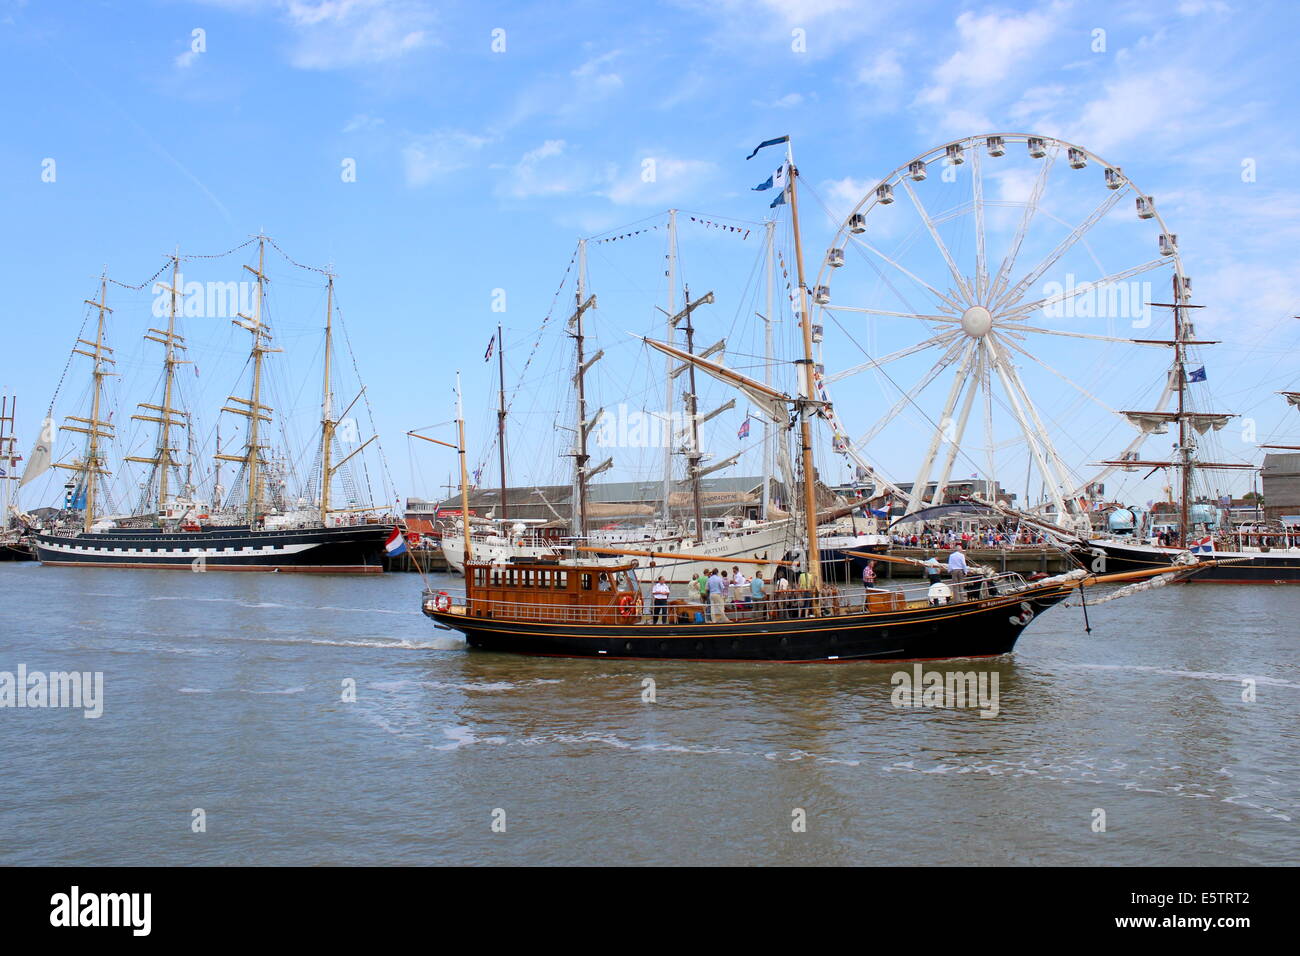 Various tall ships and sailing boats at the July 2014 Tall Ship Races in Harlingen, Netherlands Stock Photo